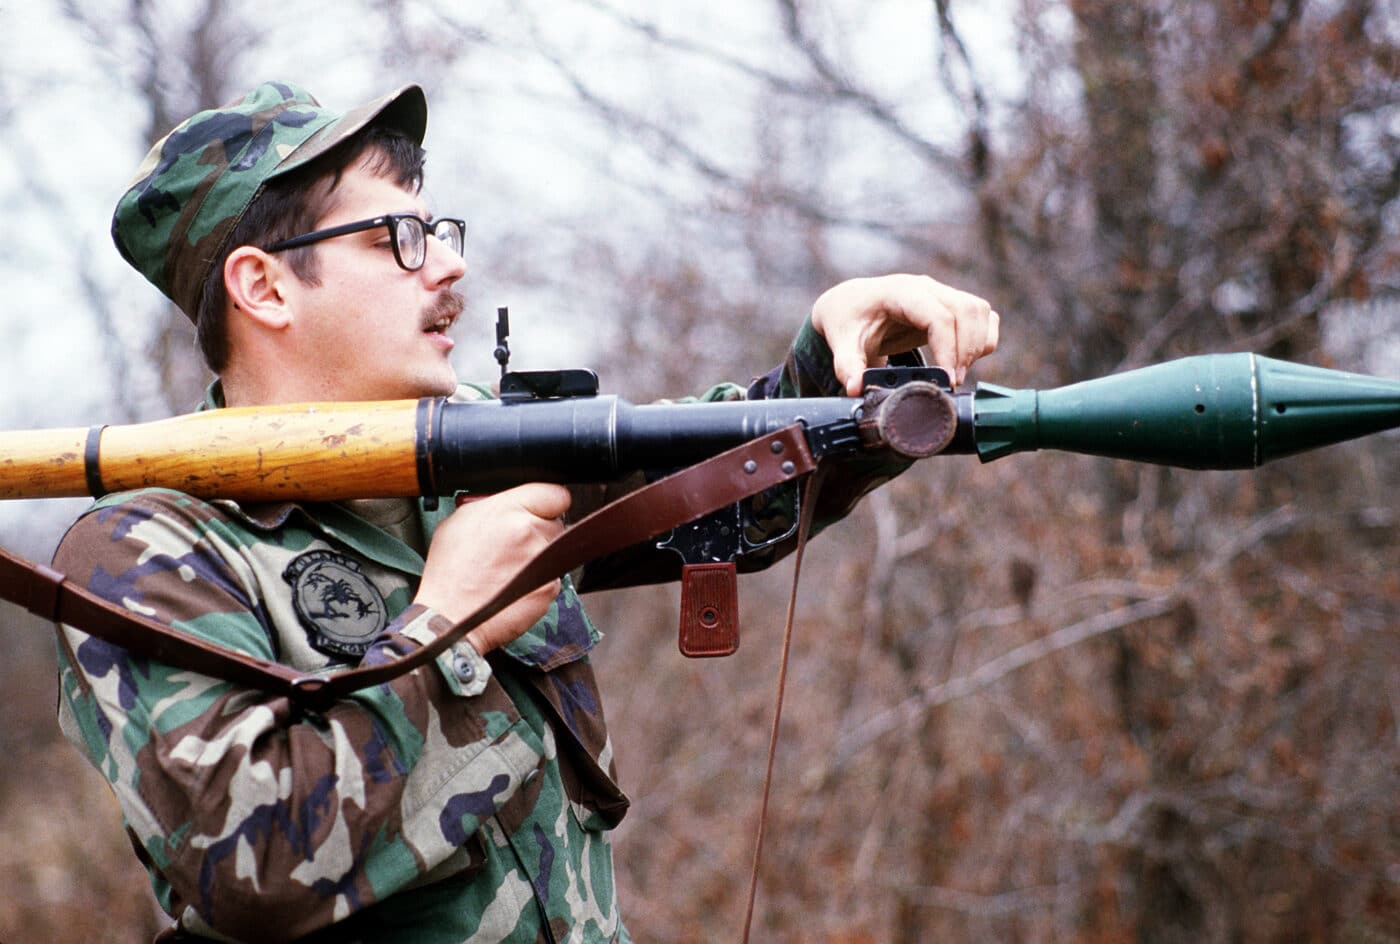 Staff Sgt. James Bradsher demonstrates the use of a Soviet made RPG-7 in 1984